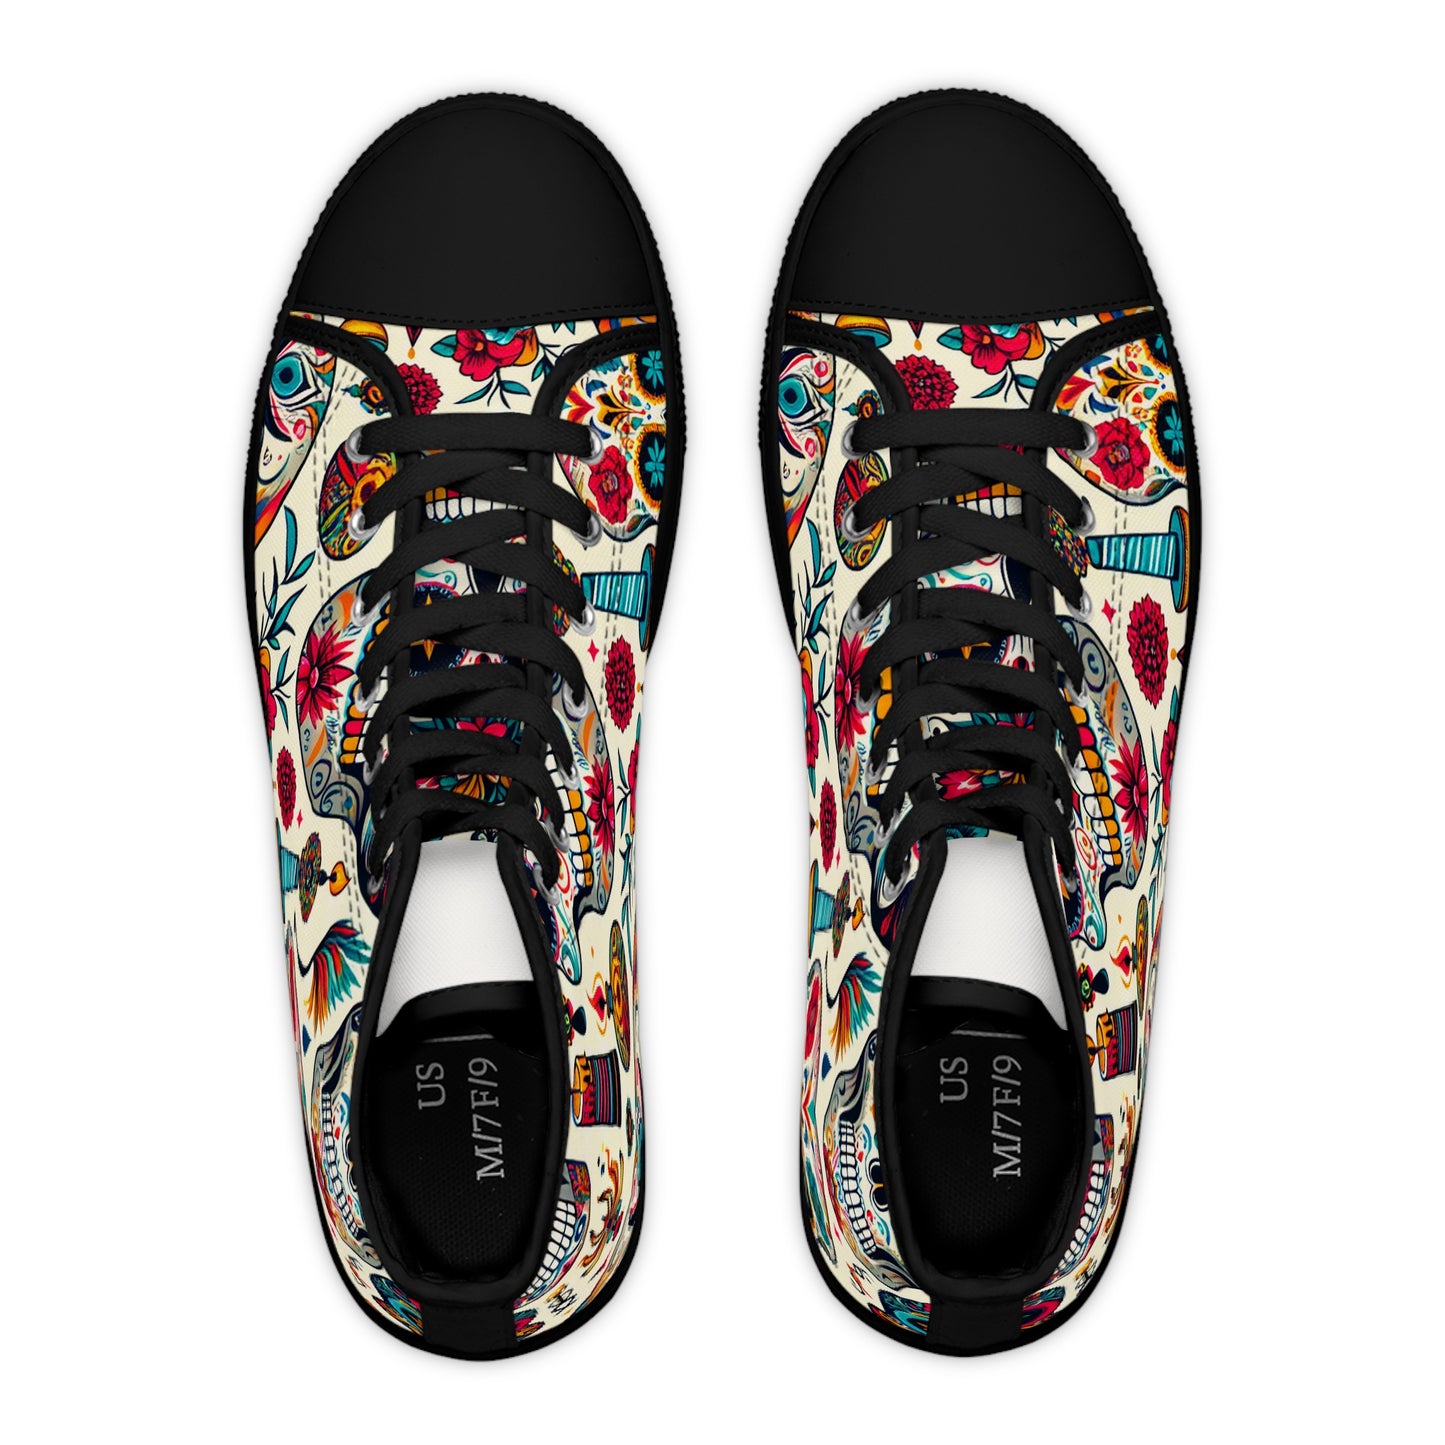 "Skull Fiesta: A Colorful Celebration of Life High-Top Sneaker - Featuring Vibrant Traditional Mexican Artistry and Dynamic Designs Perfect for Any Modern Look!"- High Top Trainers Fashion Sneakers